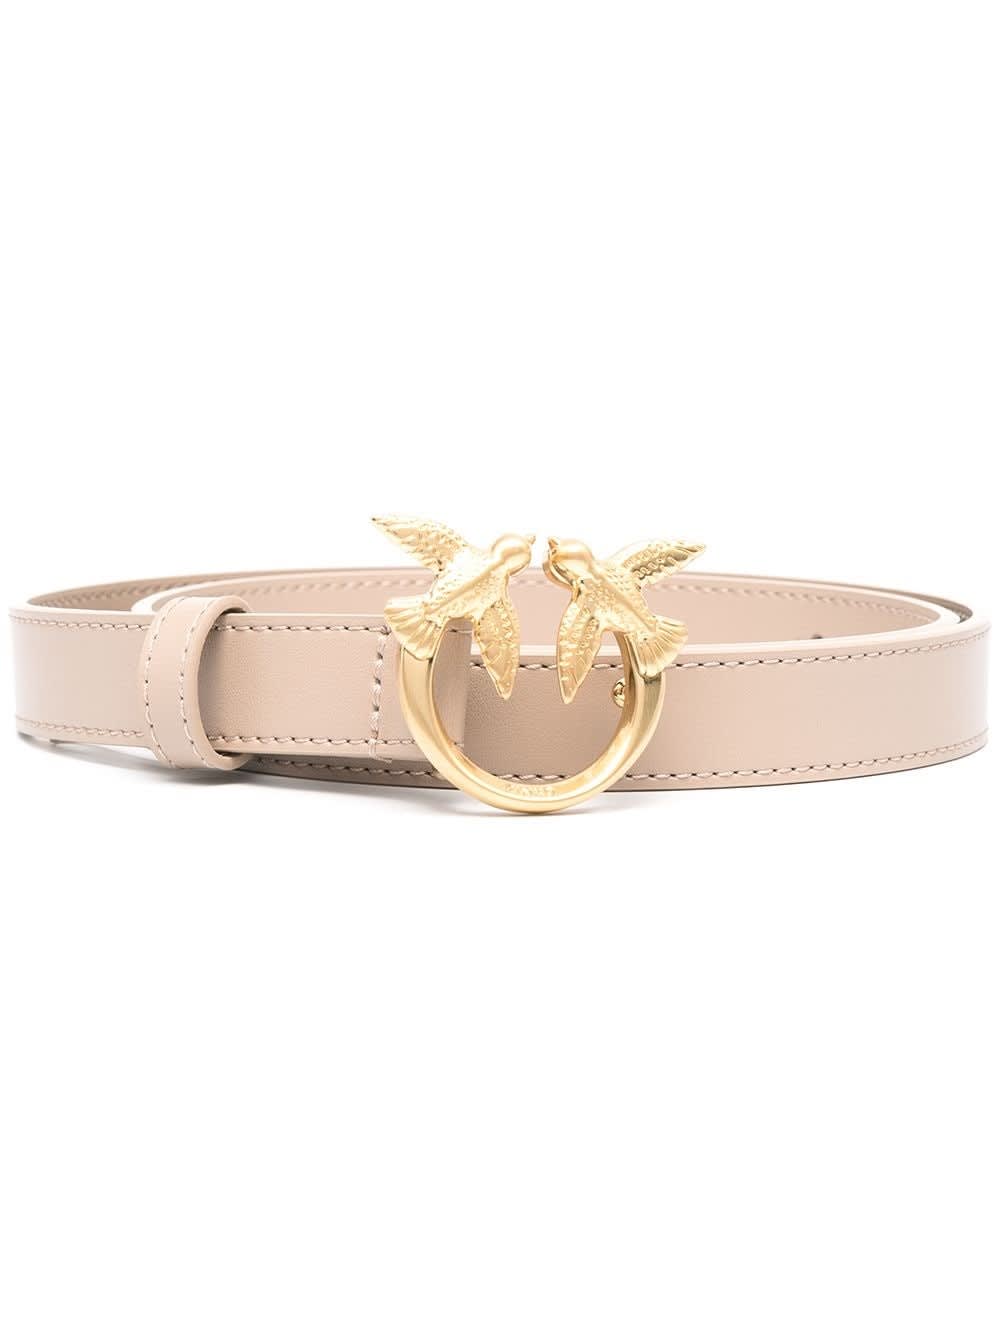 Pinko Love Berry Belt In Beige Leather With Logoed Buckle